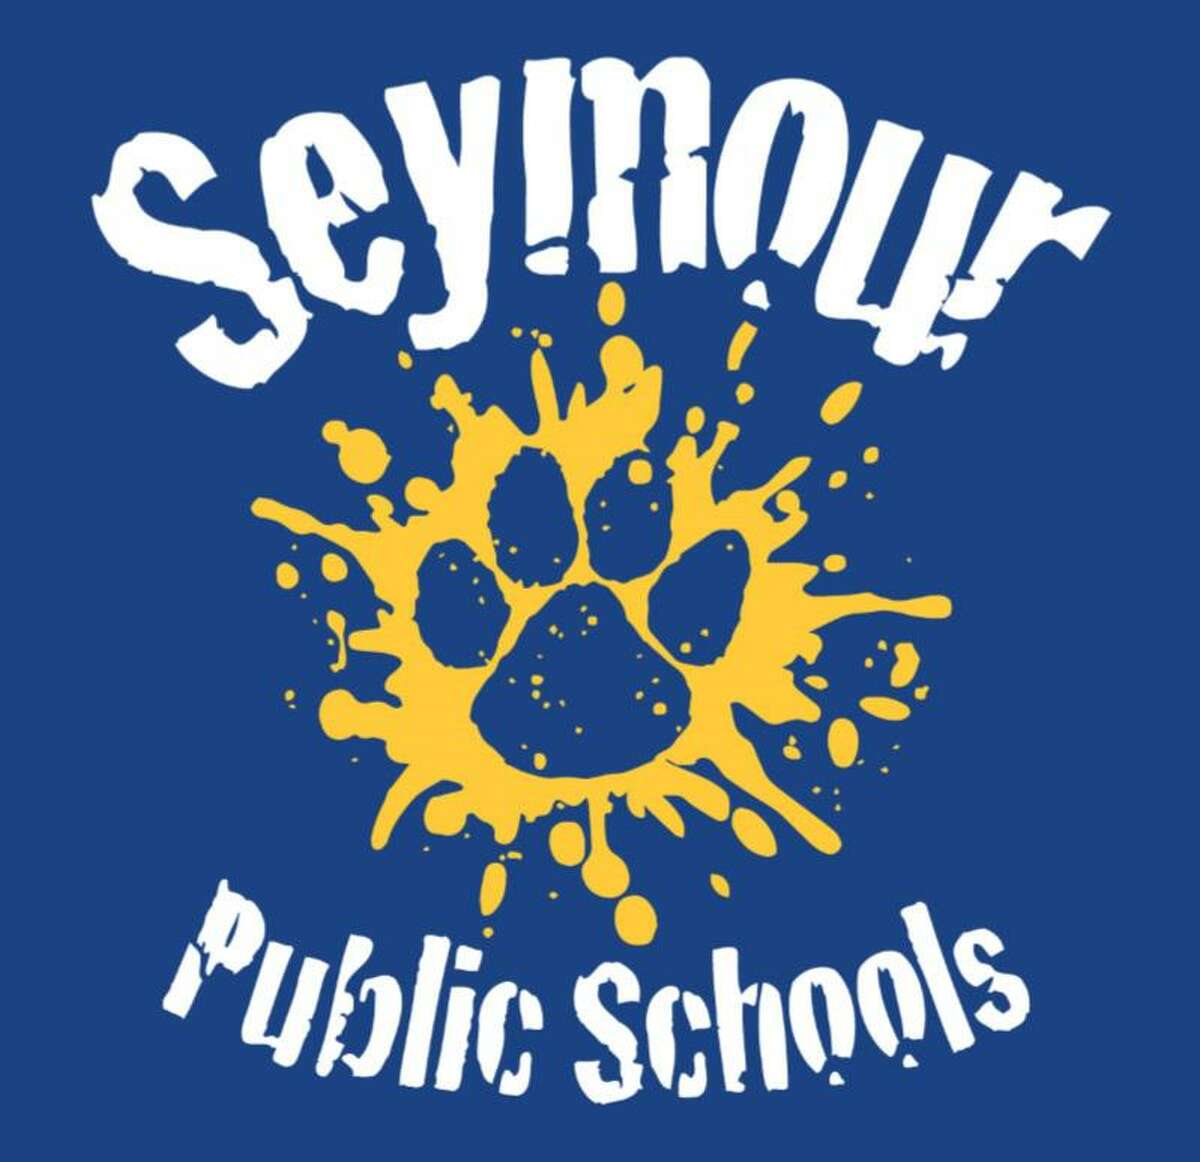 Seymour schools awards ceremony moves online amid pandemic